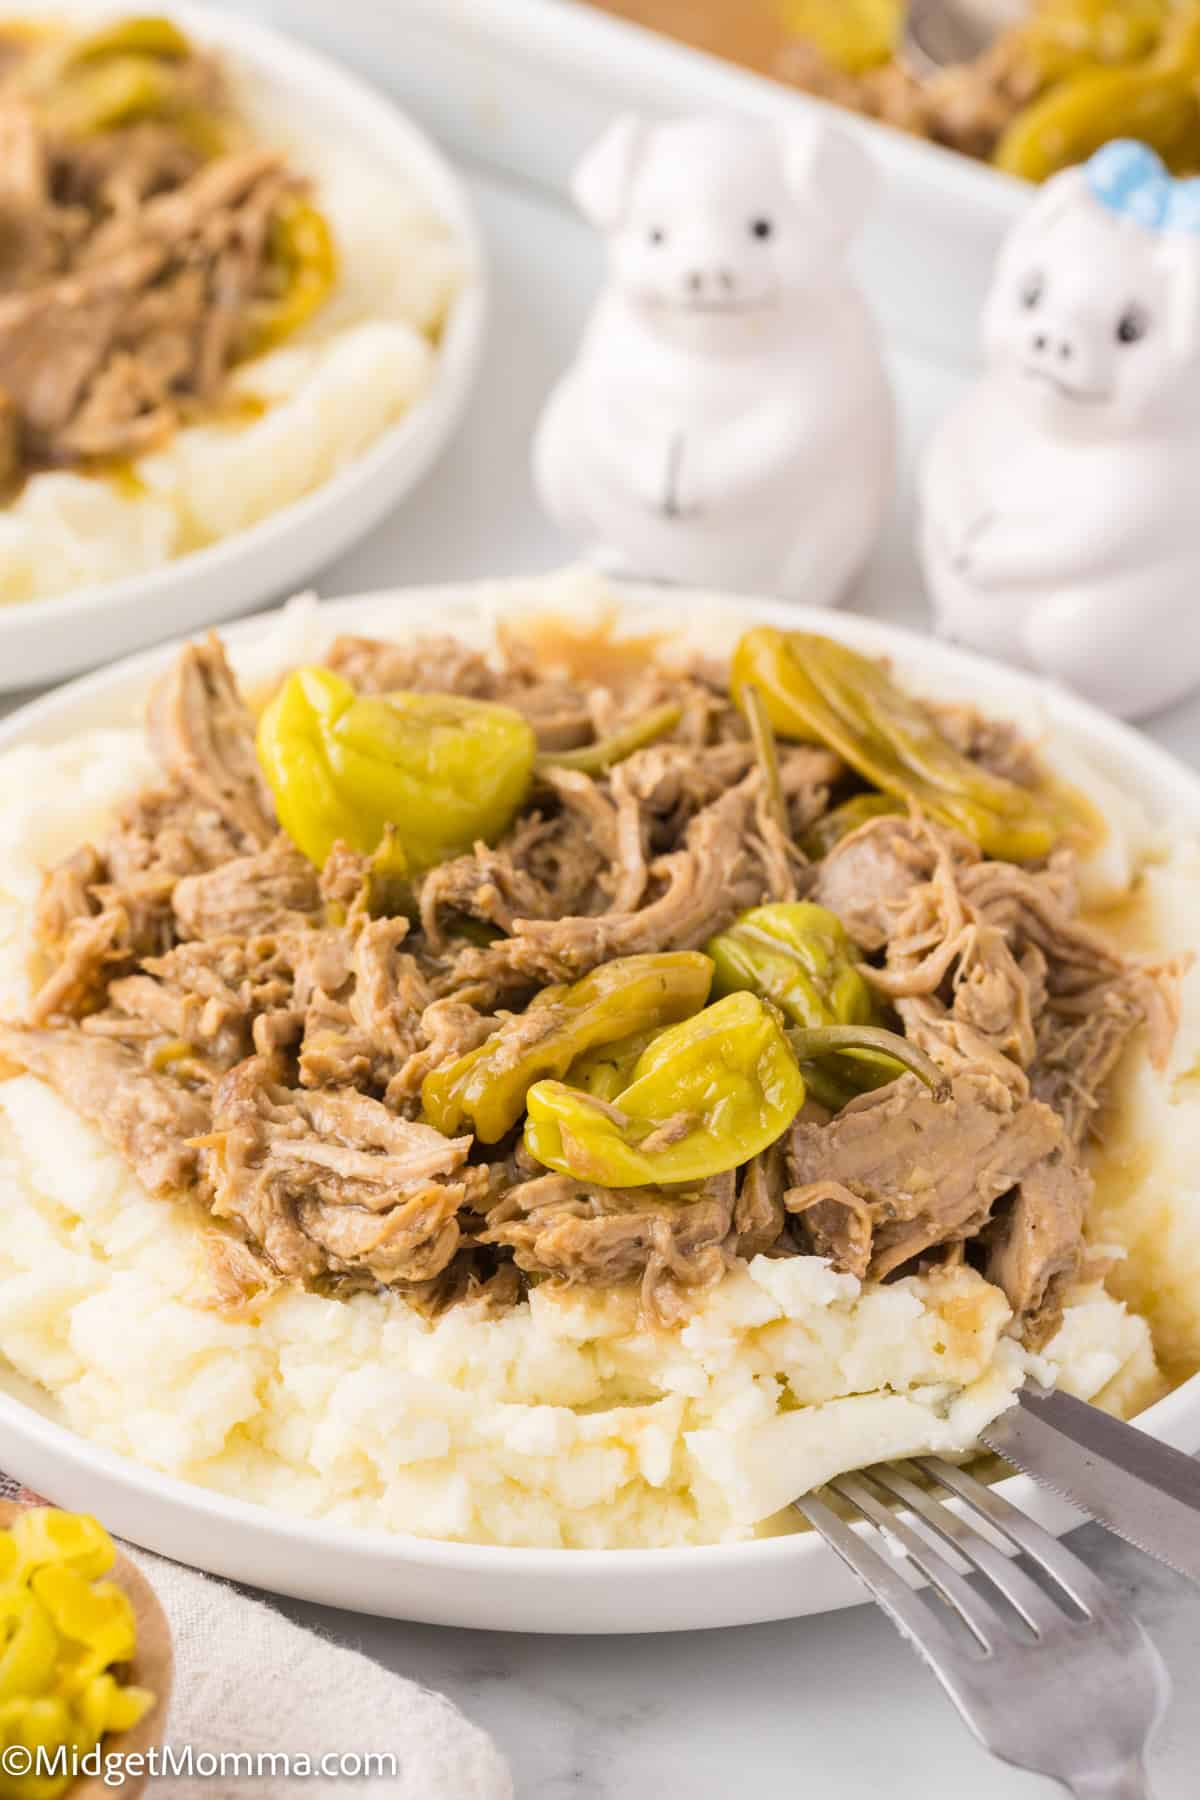 A plate of shredded pork roast topped with peppers served on a bed of mashed potatoes. Two pig-shaped salt and pepper shakers are in the background. A fork is resting on the plate.